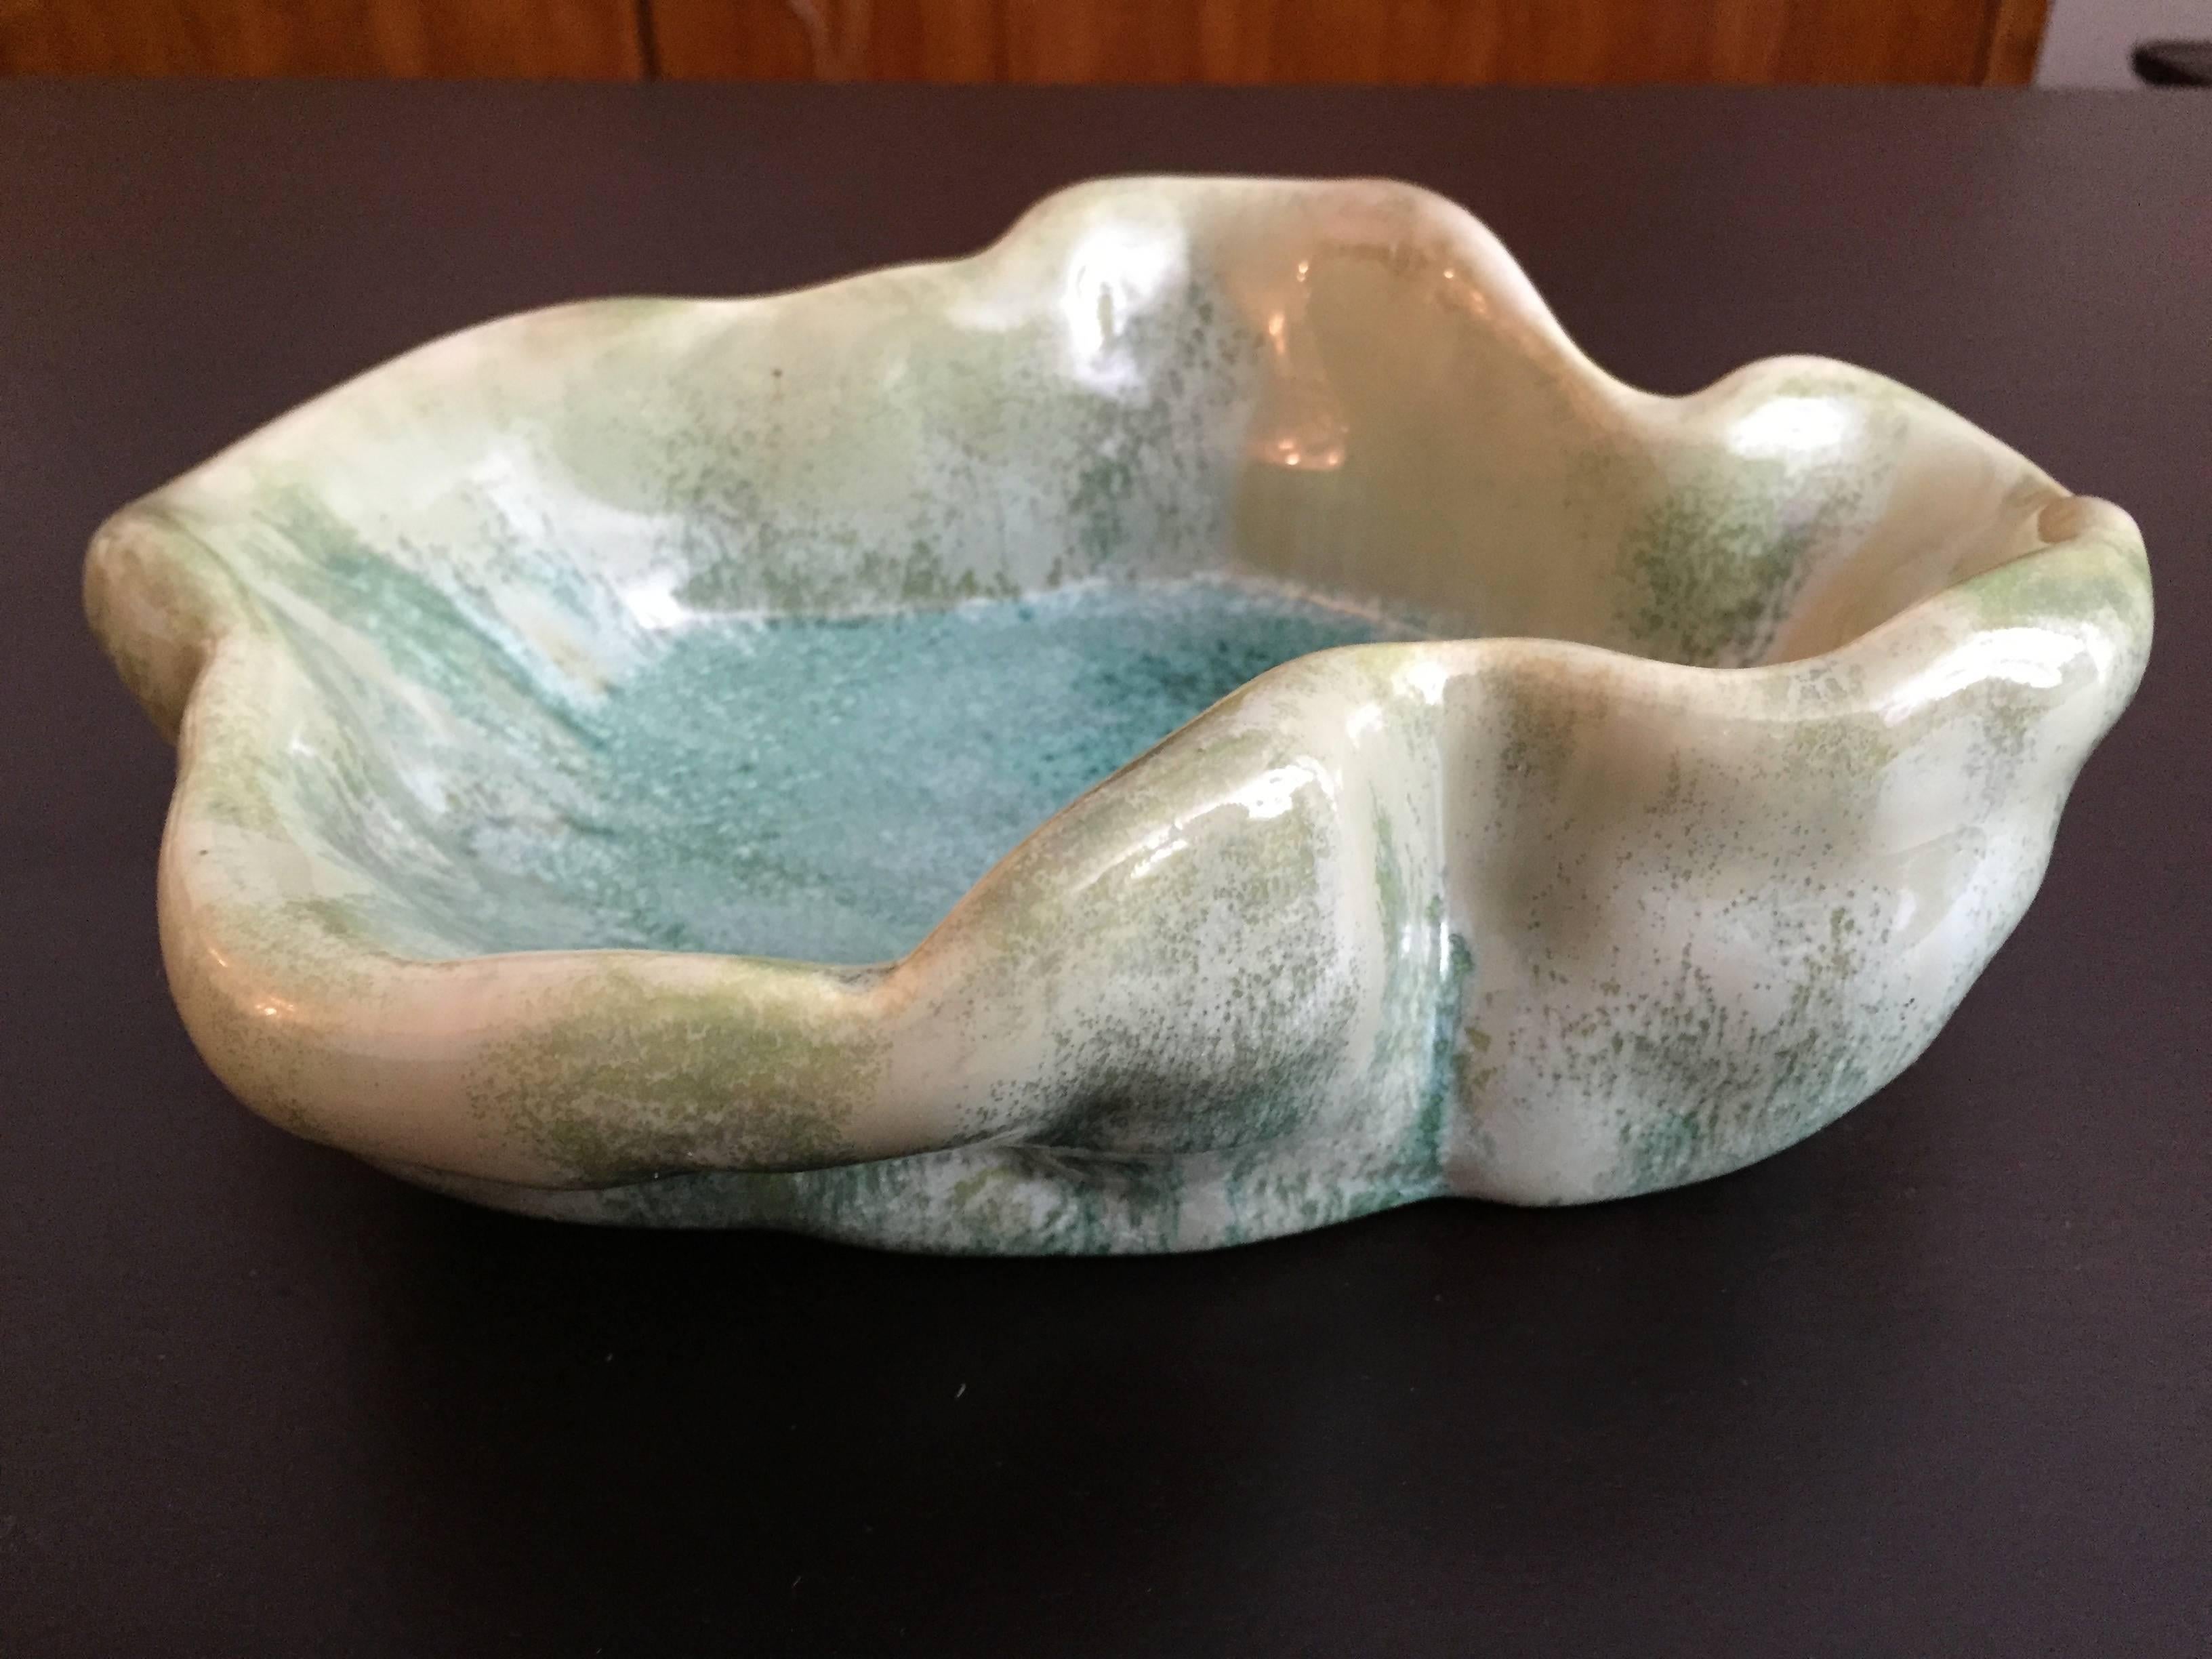 An original 1950s pale green with a slight crystalline glaze bowl by famed Italian artist, Antonia Campi. Signed.